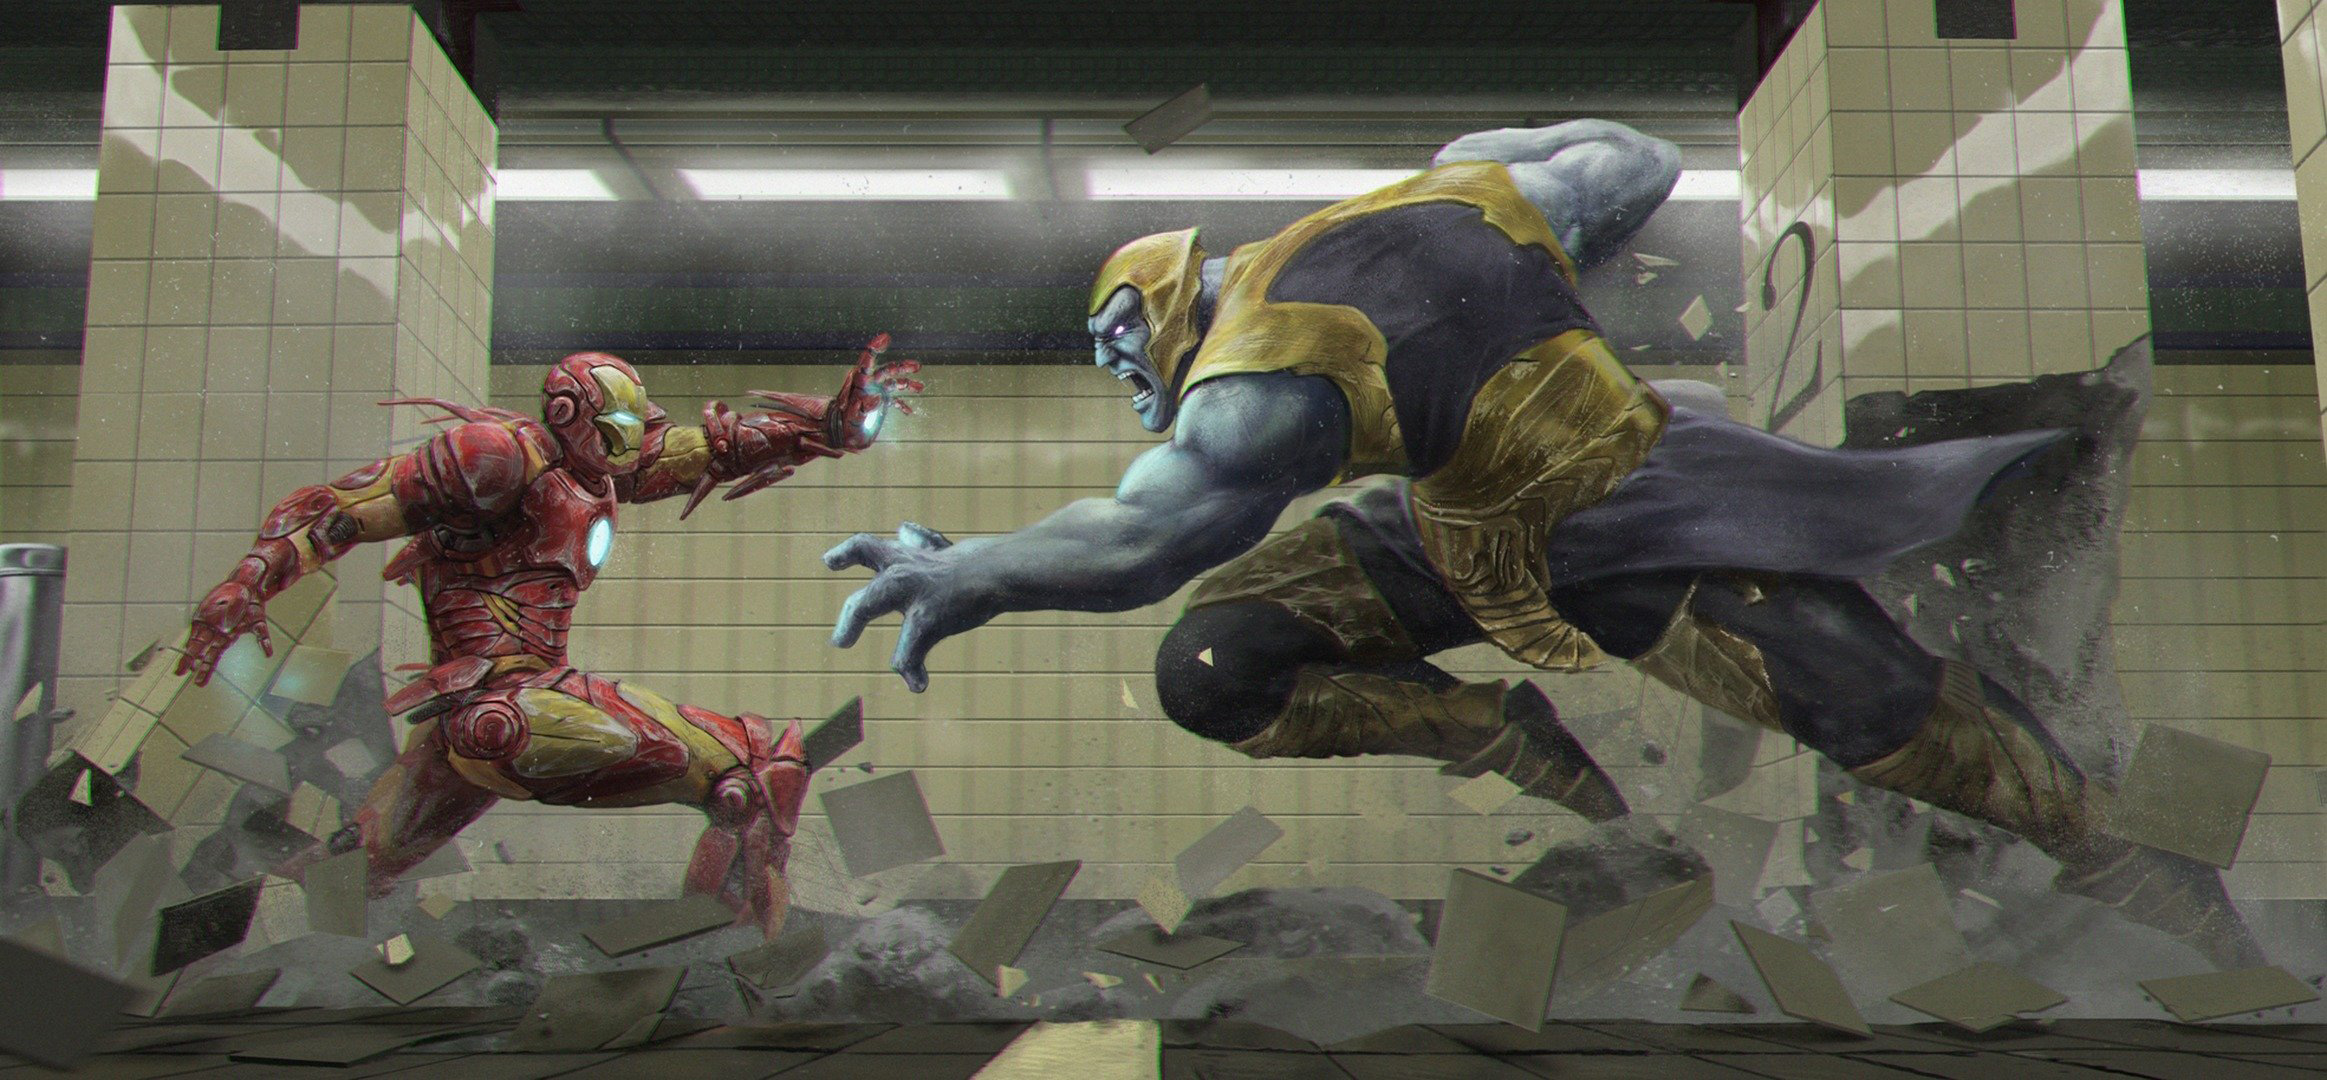 3840x2160 Thanos Vs Iron Man Avengers Infinity War 4k HD 4k Wallpapers,  Images, Backgrounds, Photos and Pictures